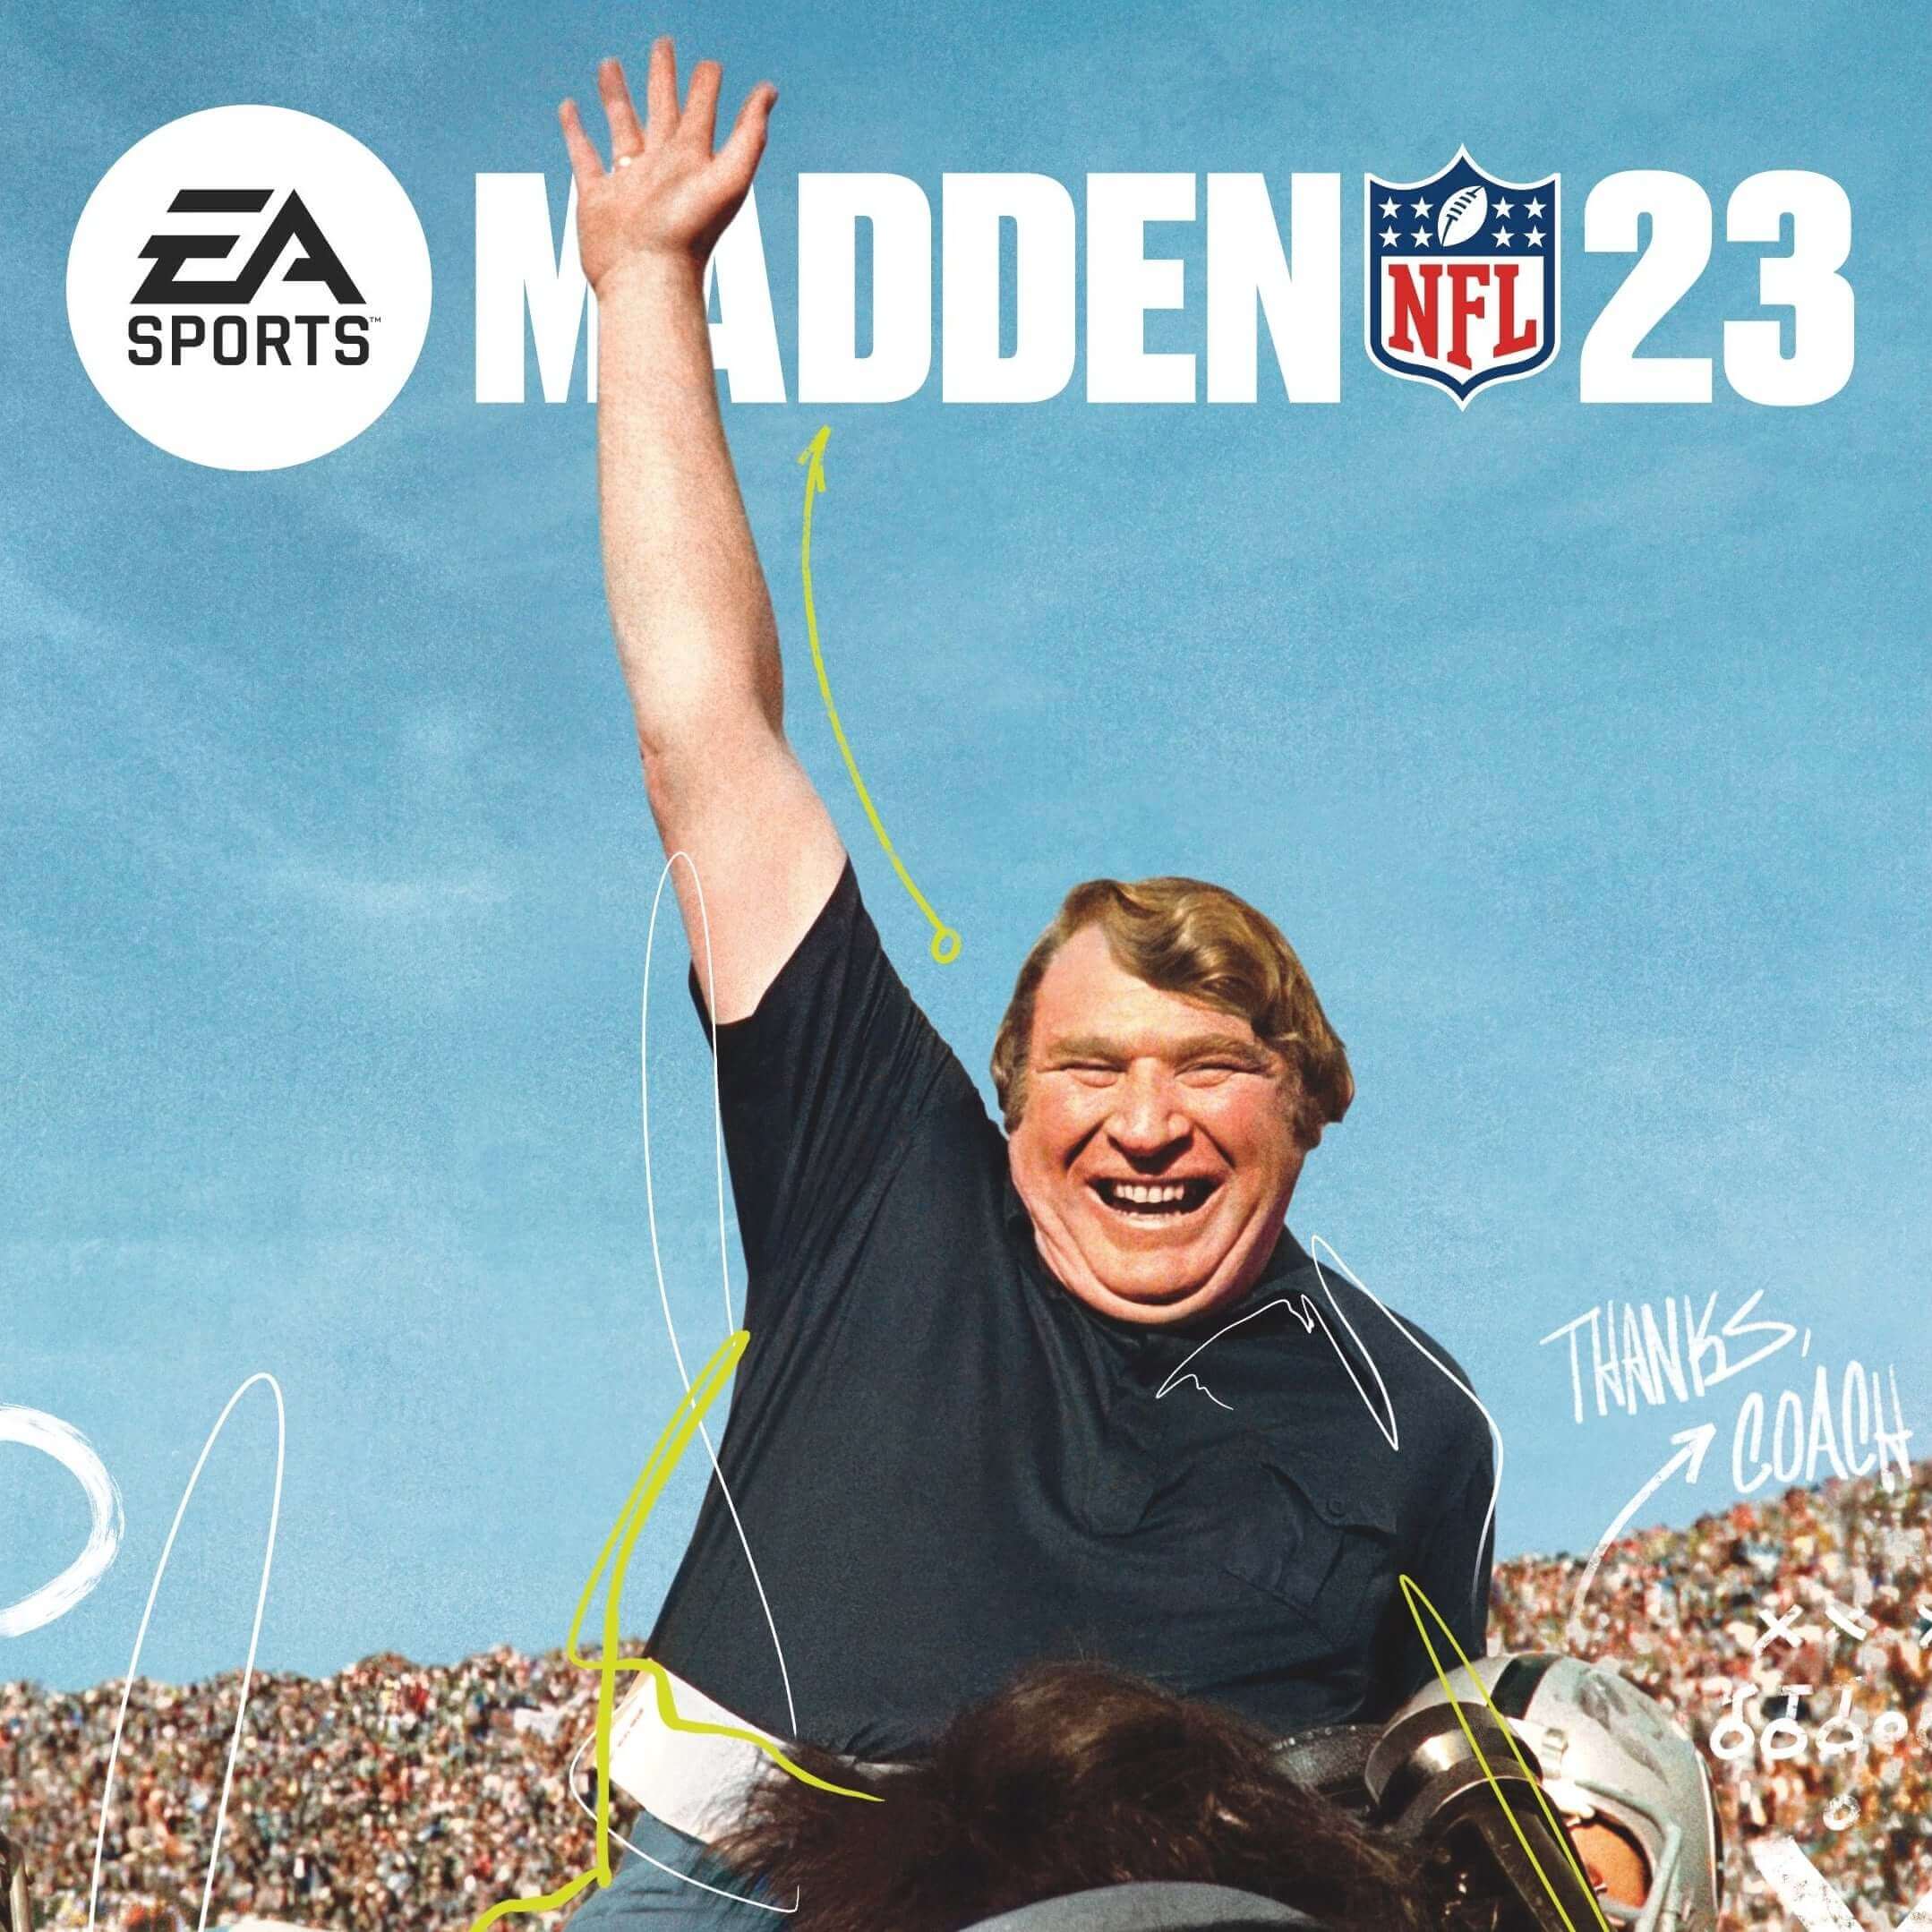 Madden 23 cover release: John Madden revealed on Madden 23 cover after his  passing last December - DraftKings Network